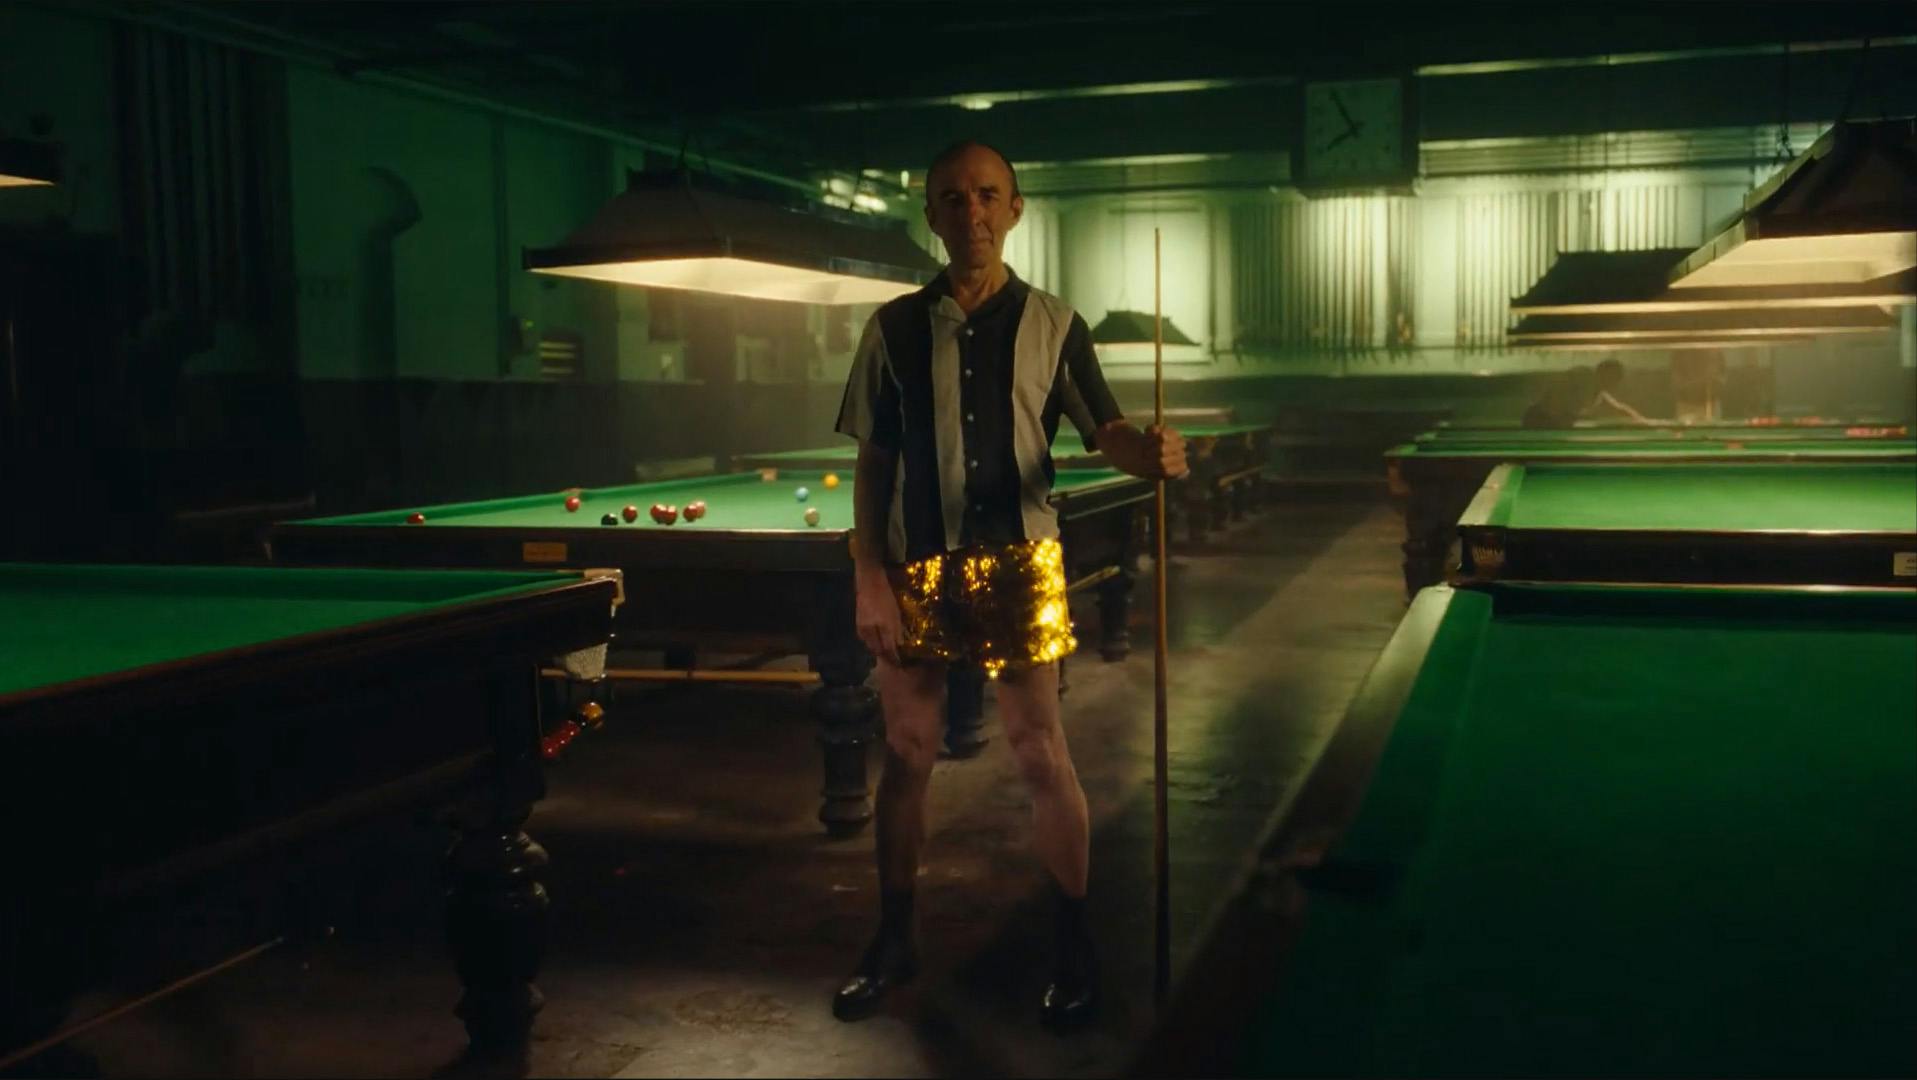 Still from the BBC Eurovision 2023 ad showing a person wearing a button-up shirt and gold glittery shorts holding a pool cue in a darkened empty pool bar